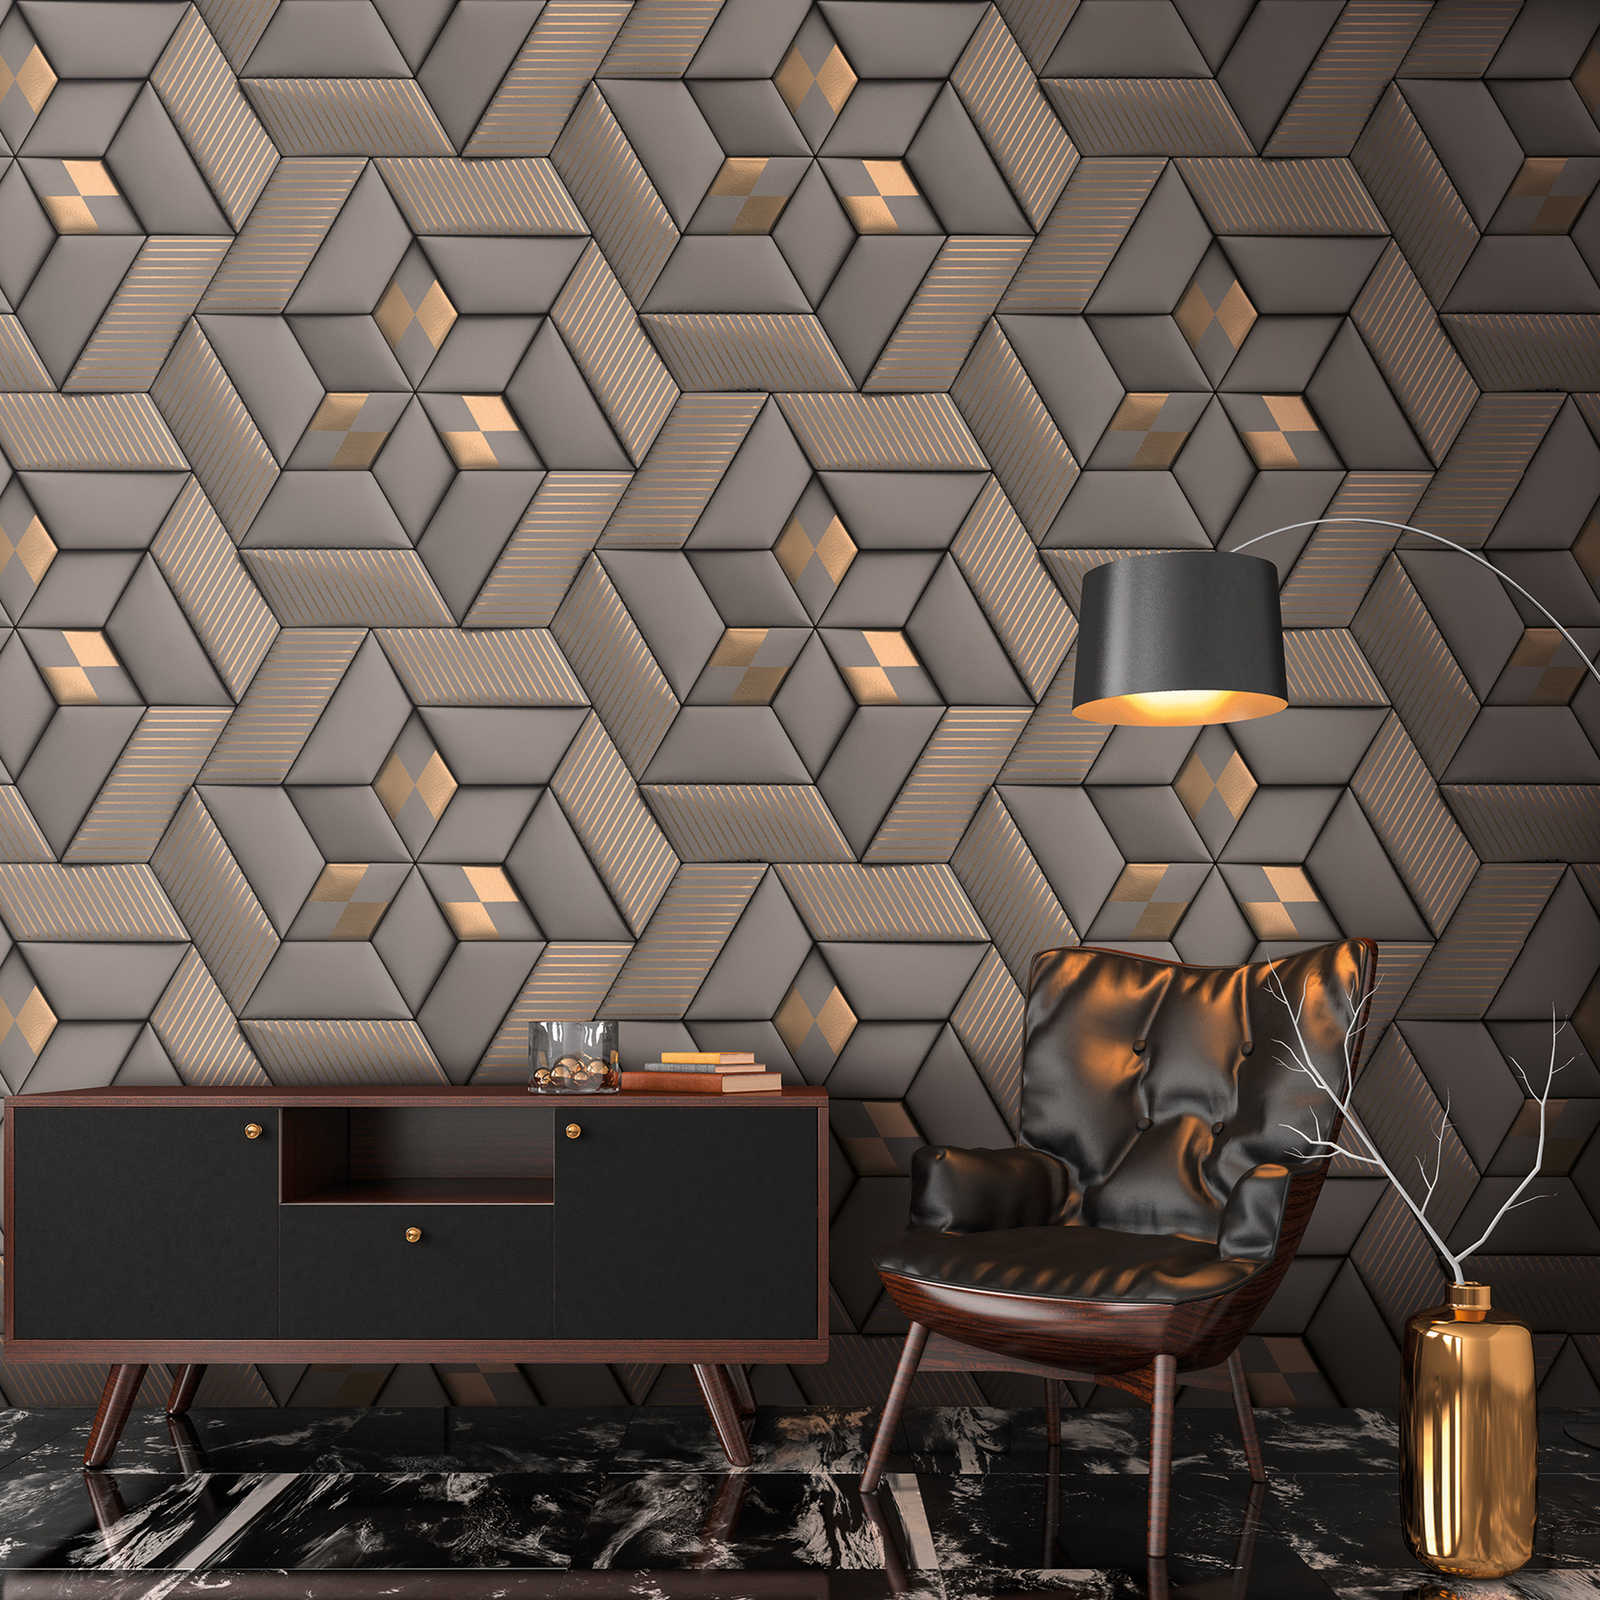         Abstract pattern wallpaper with 3D optics - grey, taupe, bronze
    